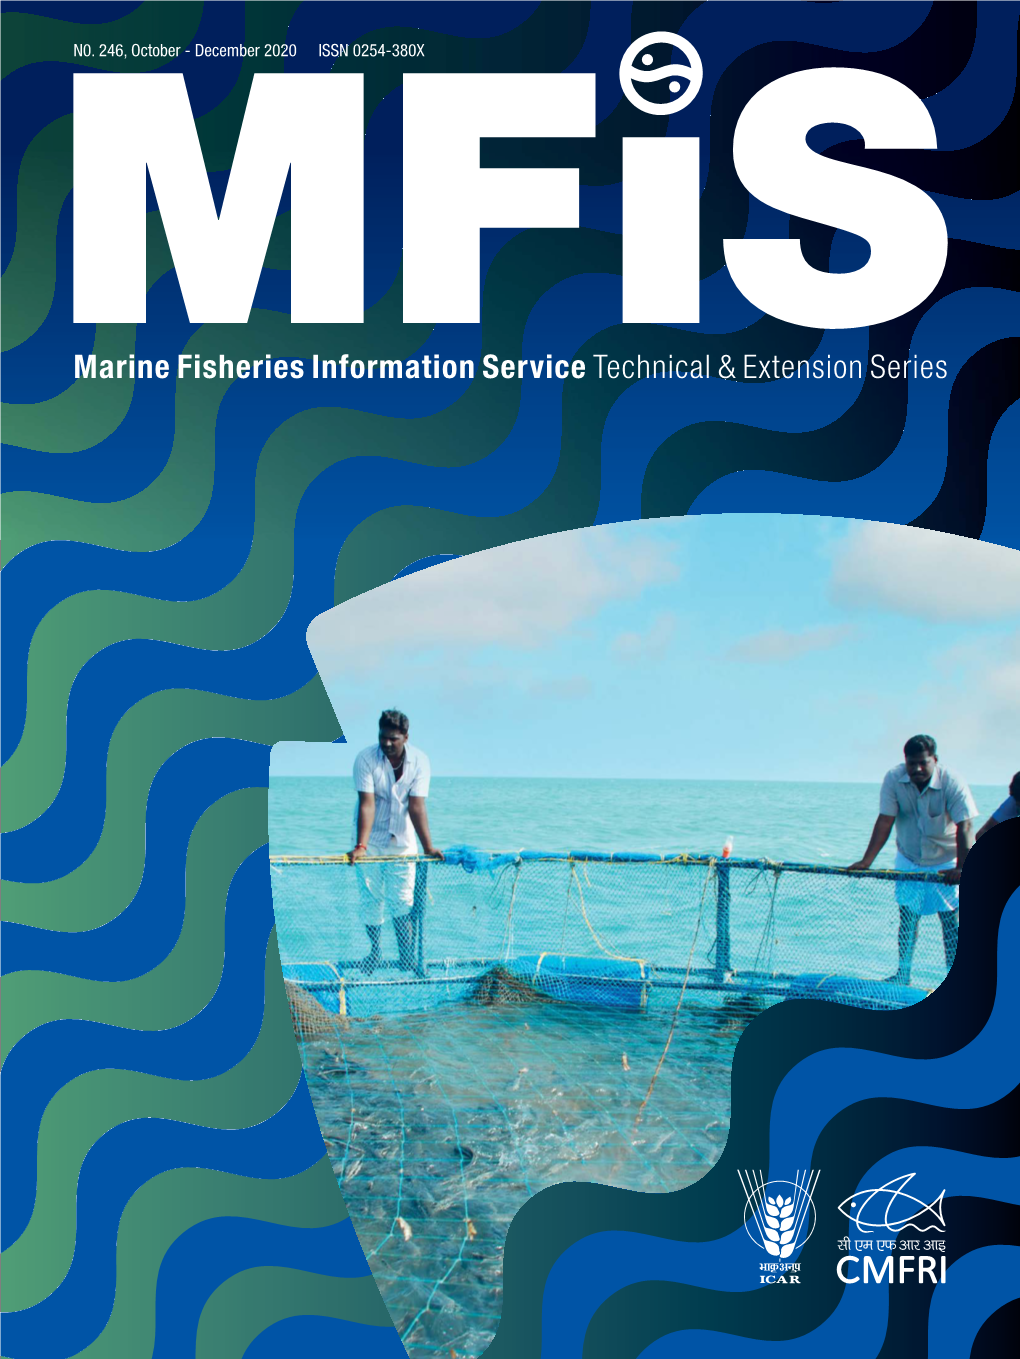 Marine Fisheries Information Service Technical & Extension Series